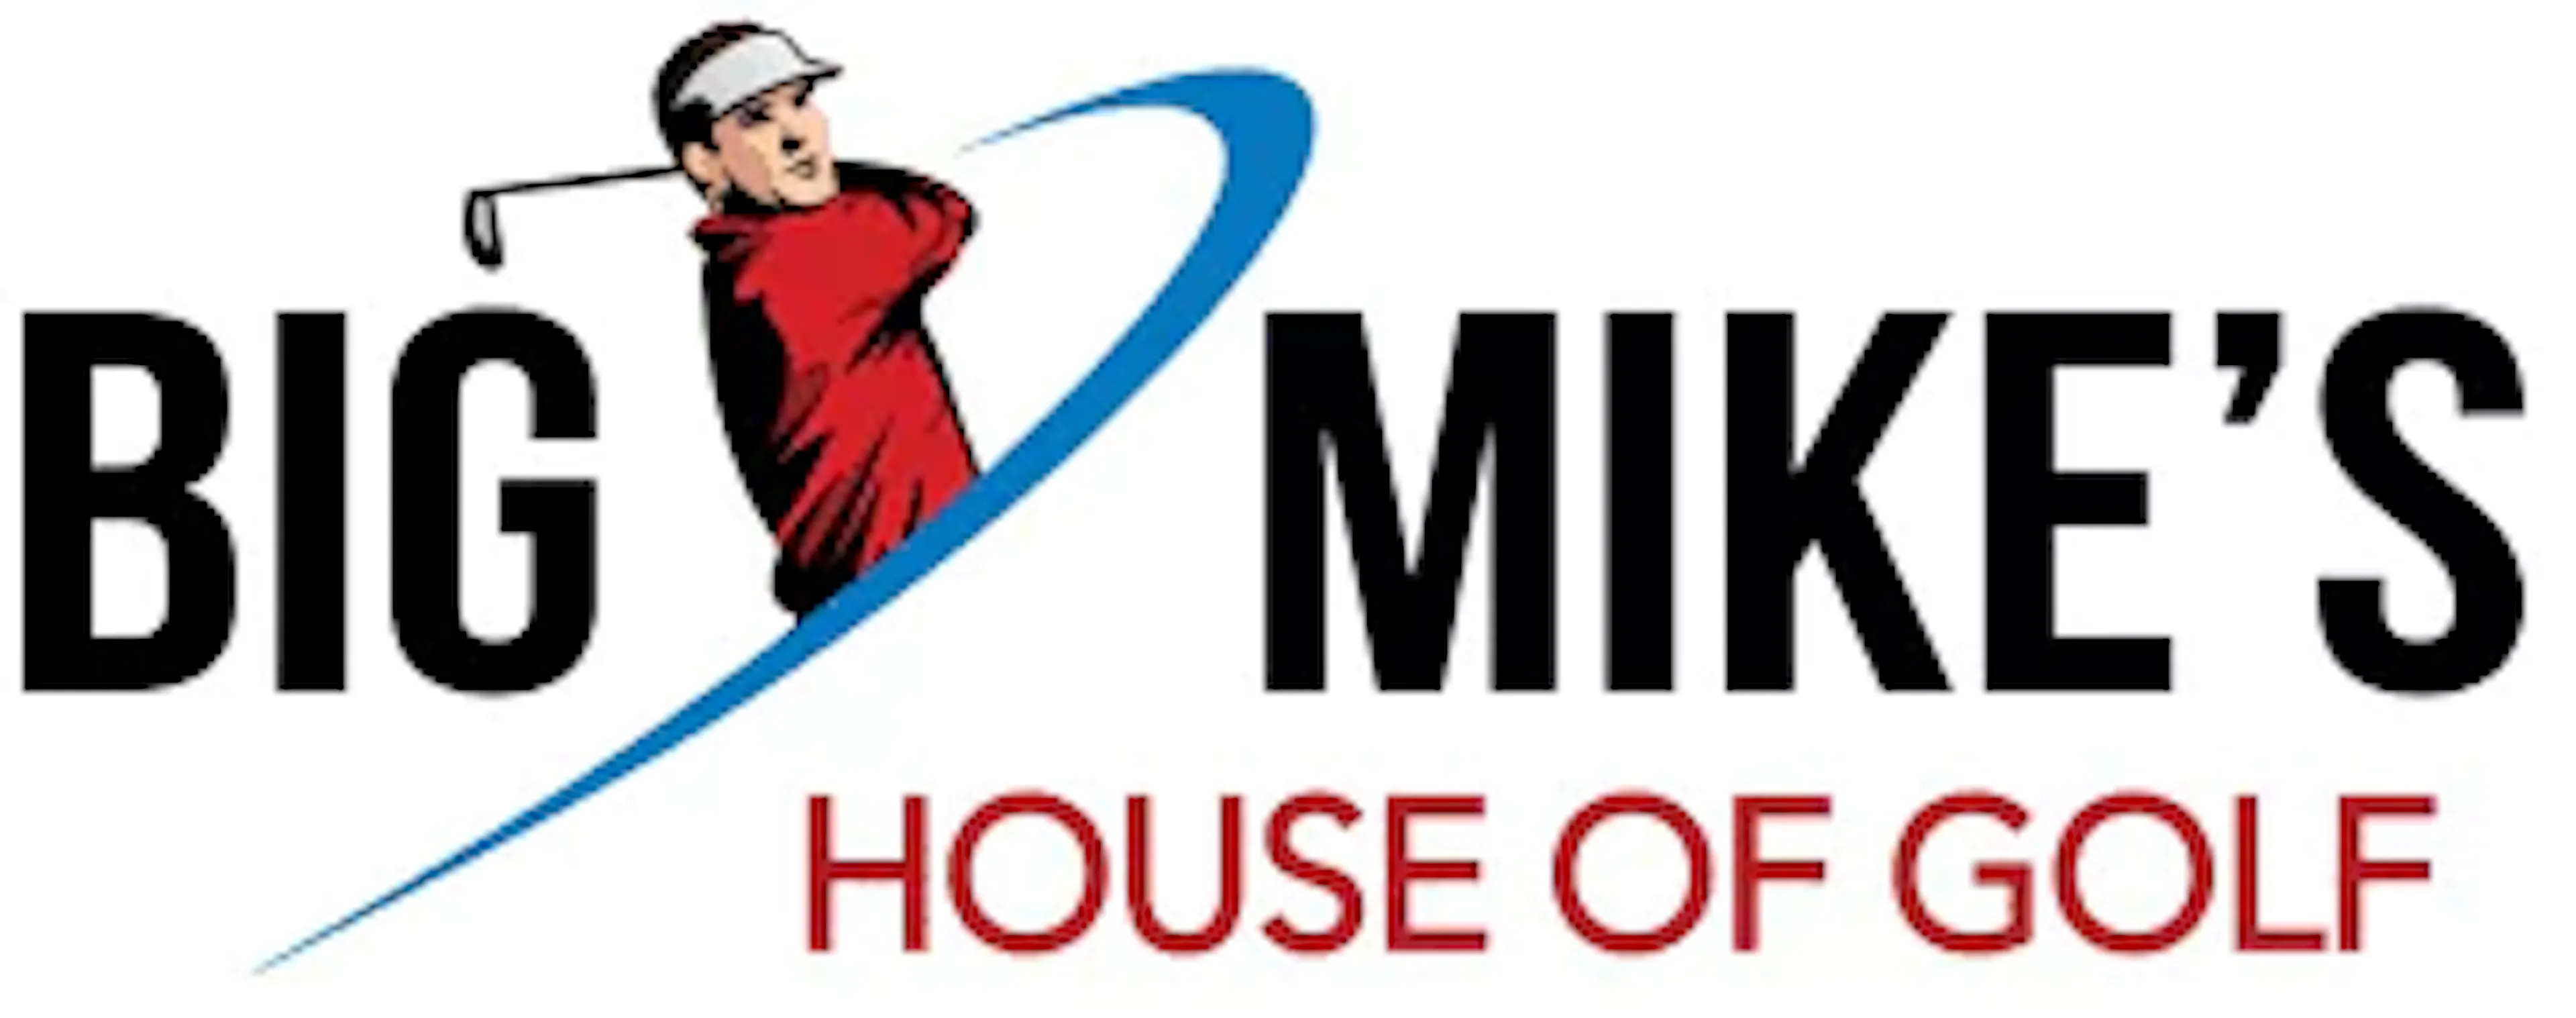 big mike's house of golf